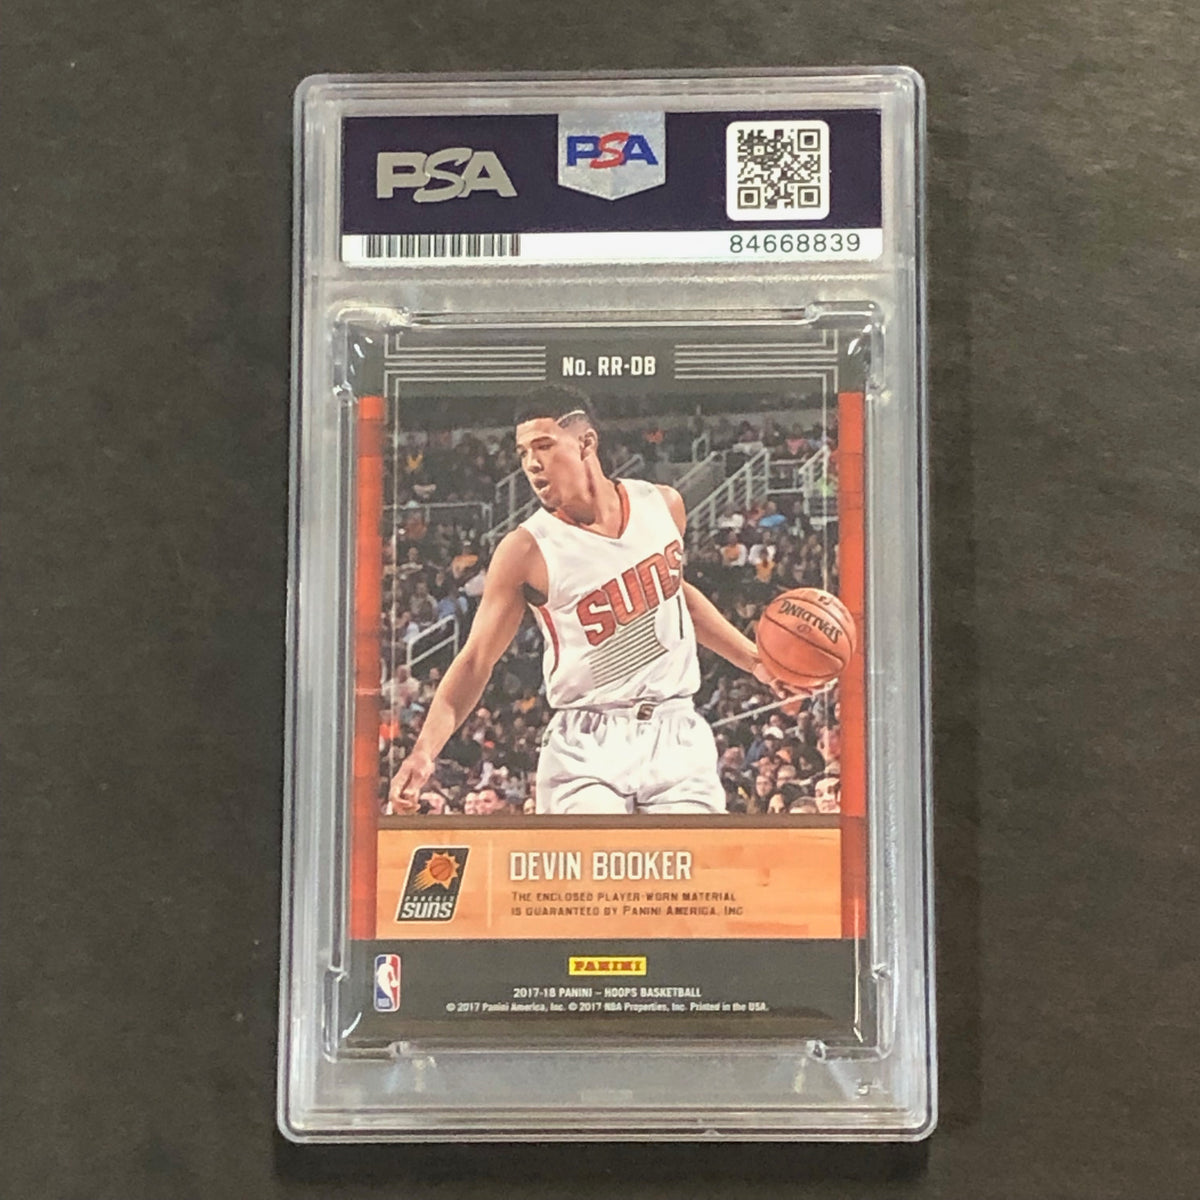 2017-18 NBA Hoops Rookie Remembrance #RR-DB Patch Devin Booker